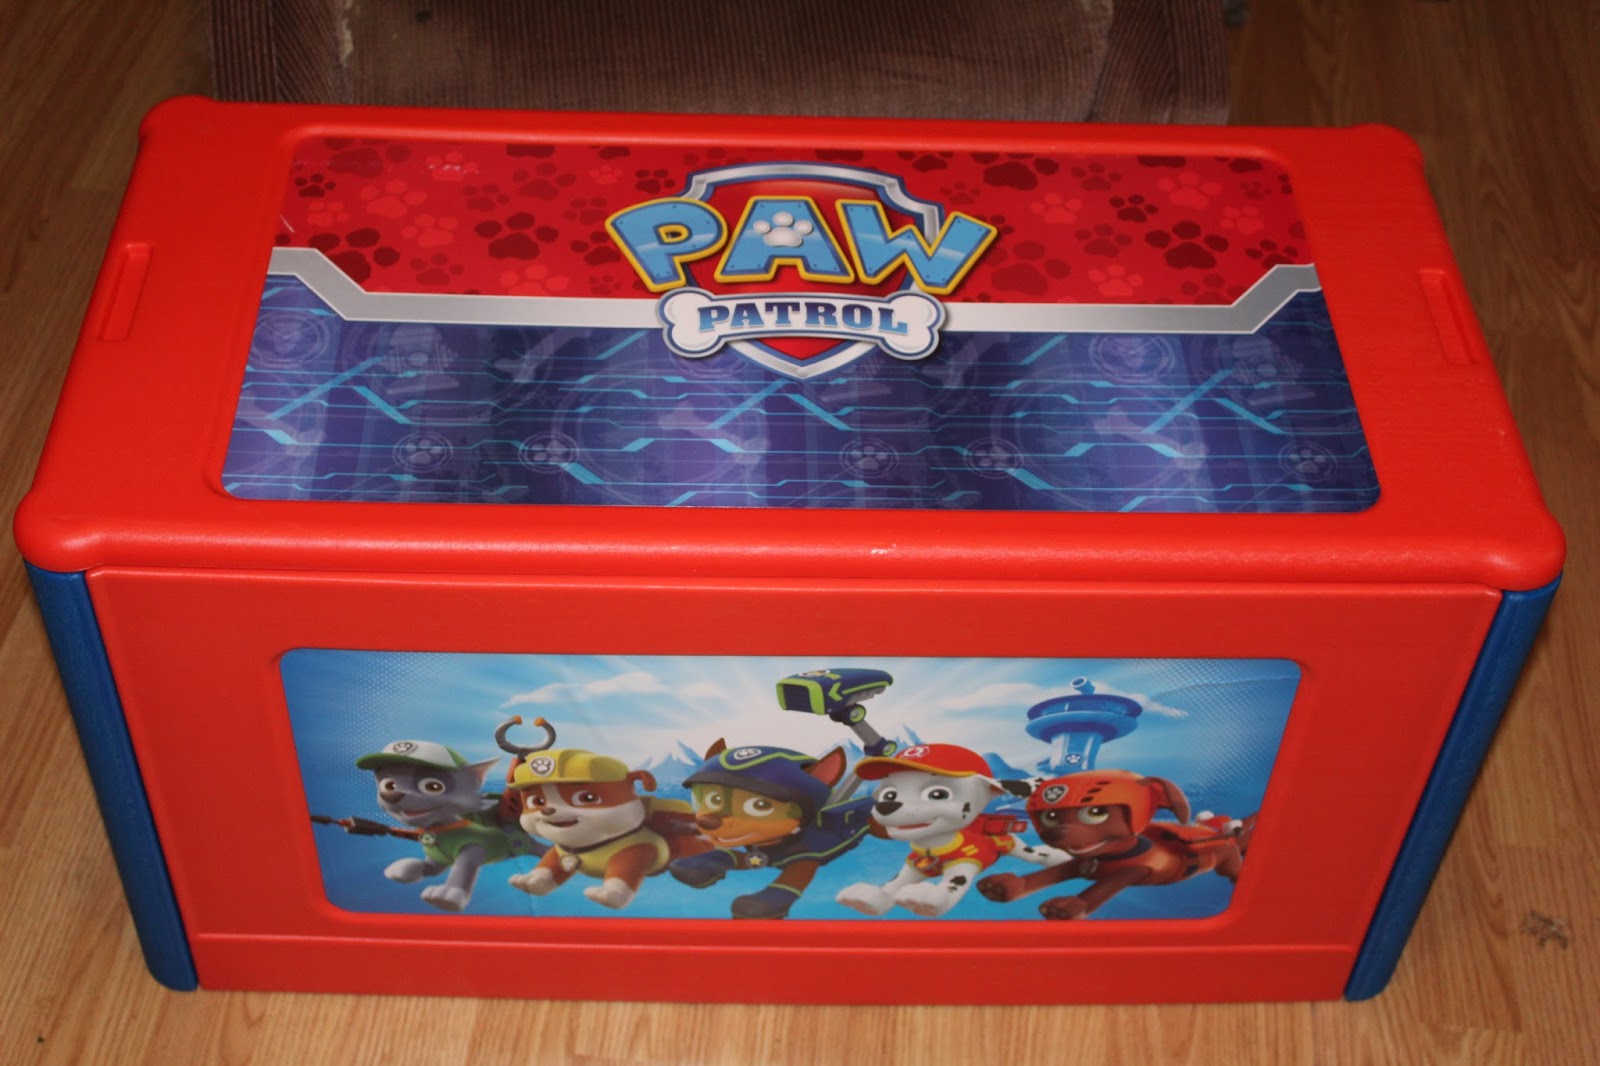 Get Your Child a Paw Patrol Toy Box from Delta Children - ChitChatMom